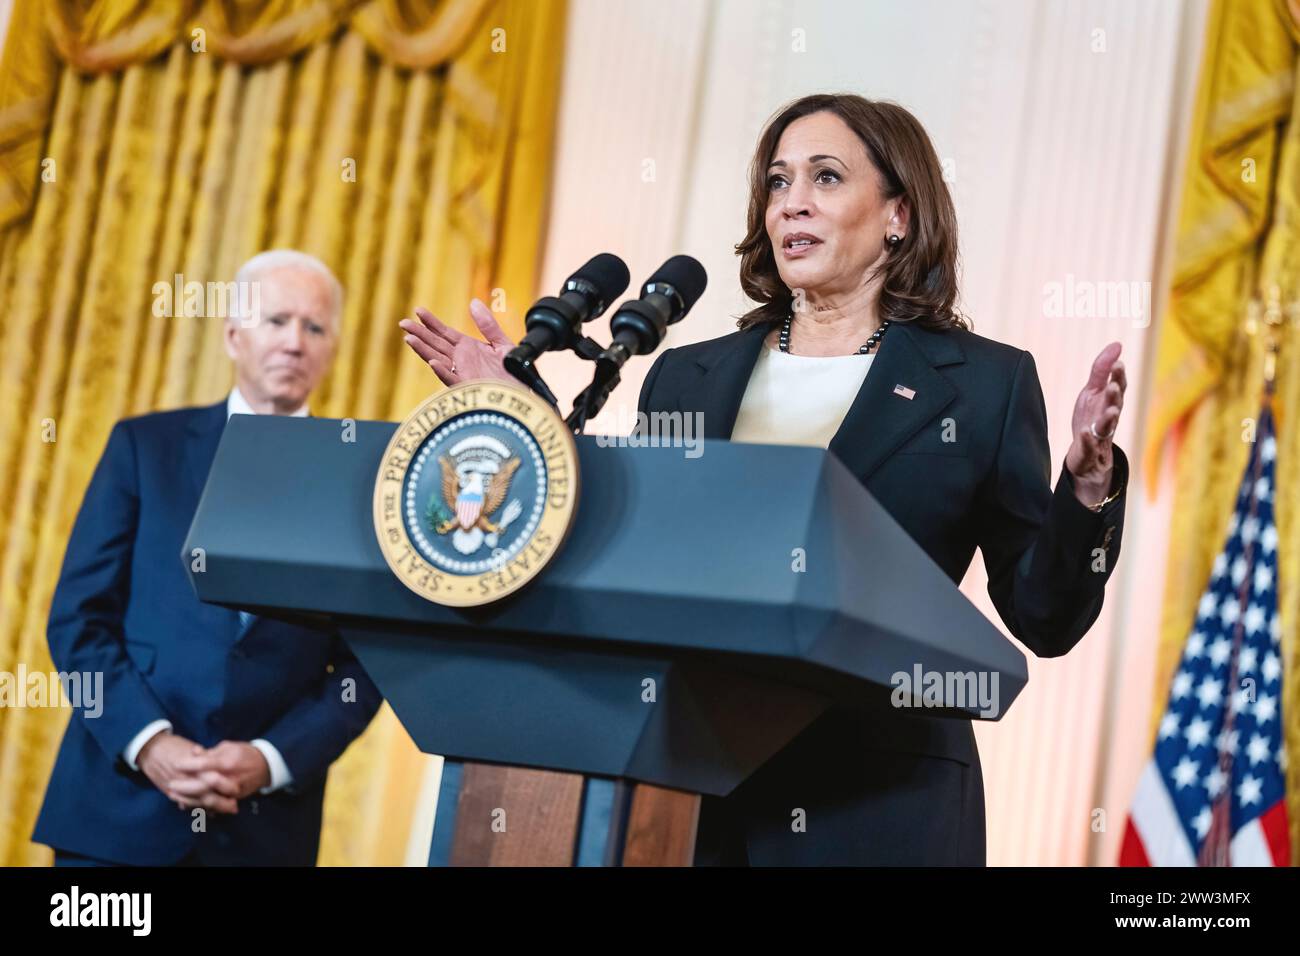 Washington D.C., USA - October 24 2022: Kamala Harris addressing the media from a presidential podium in the East Room of the White House Stock Photo